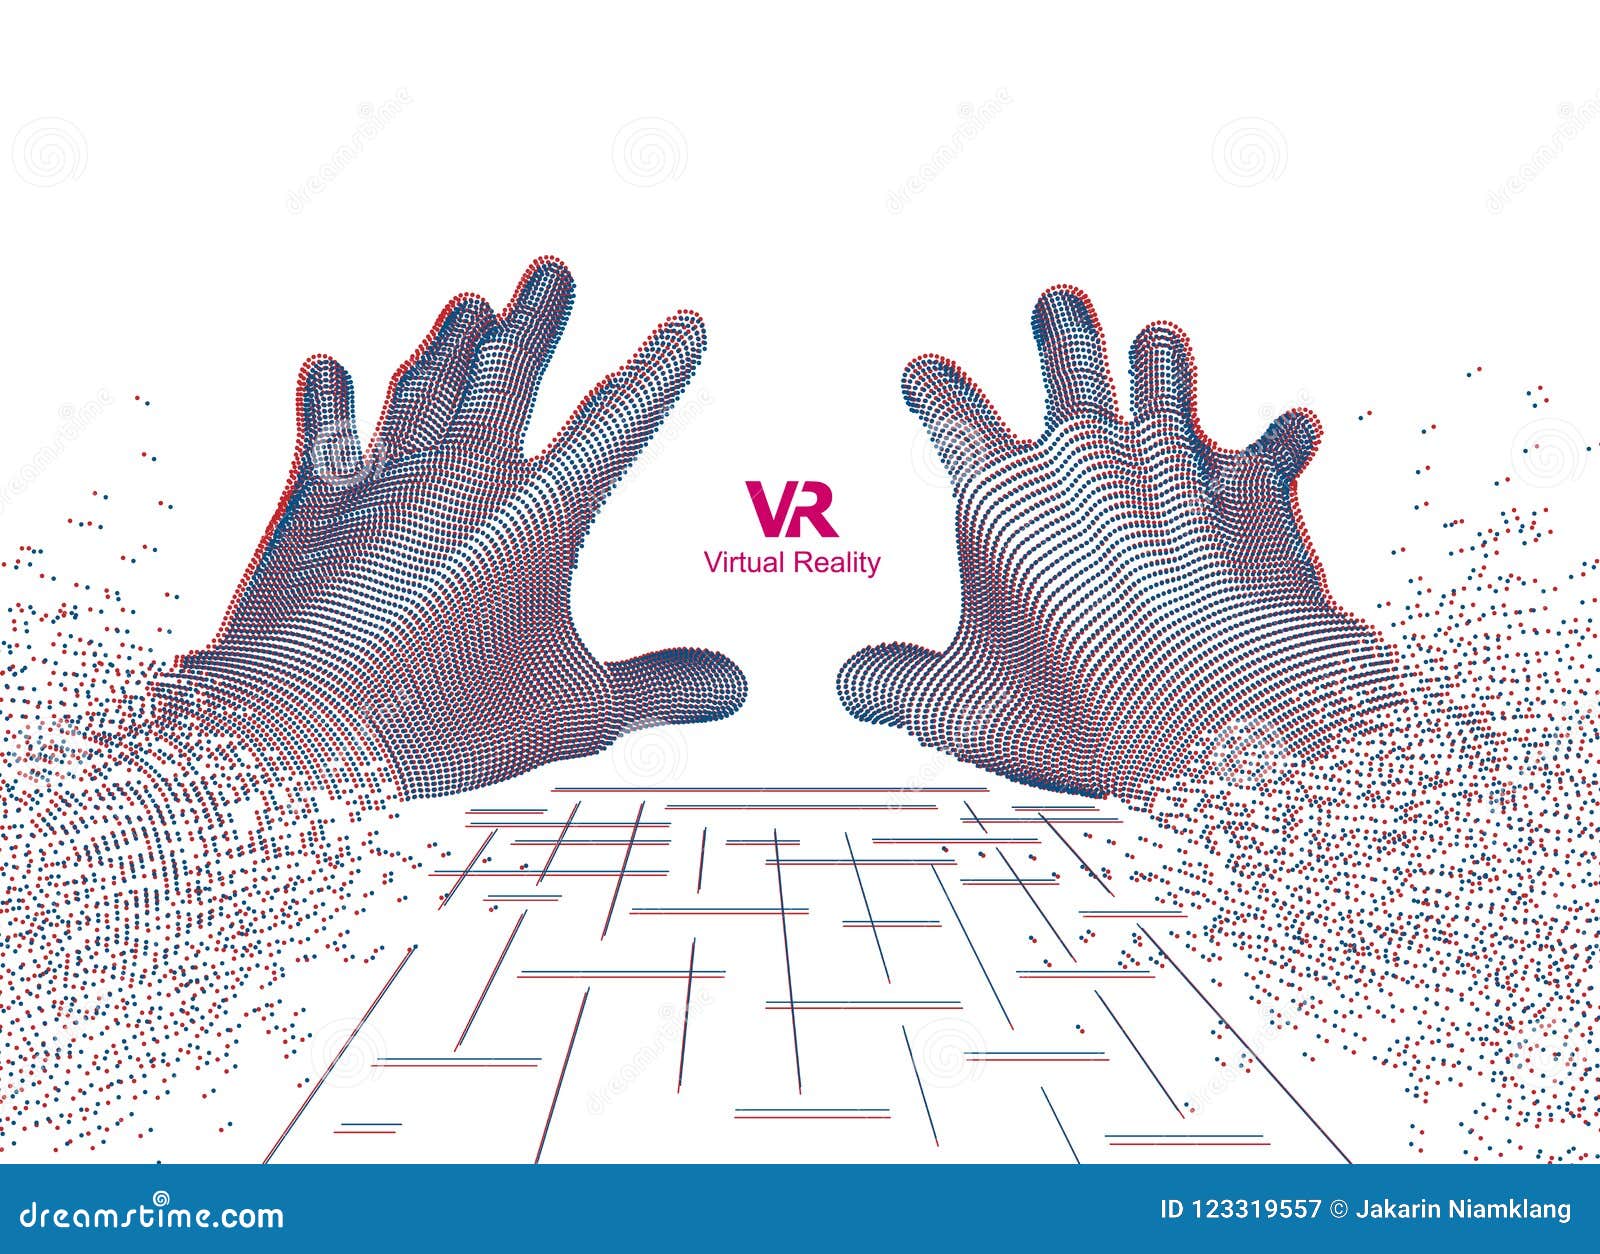 VR hands stock Illustration of space, 123319557